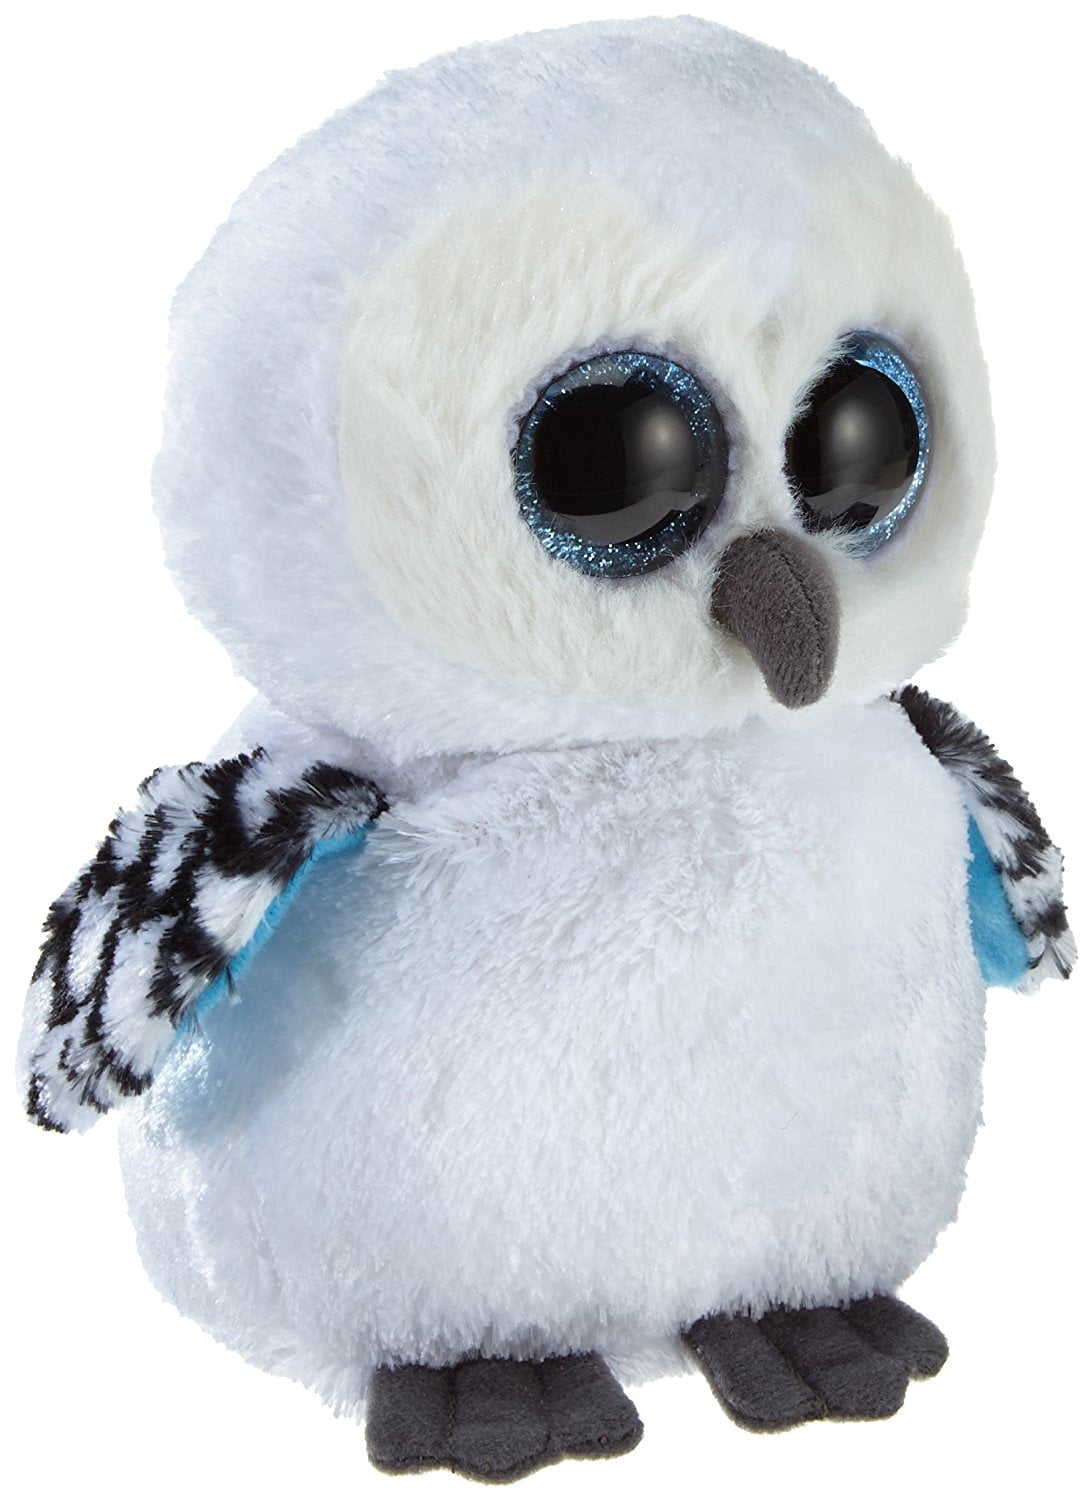 Ty Beanie Boo Spells The White Owl Clip 2013 MWMT RARE & Retired HTF for sale online 